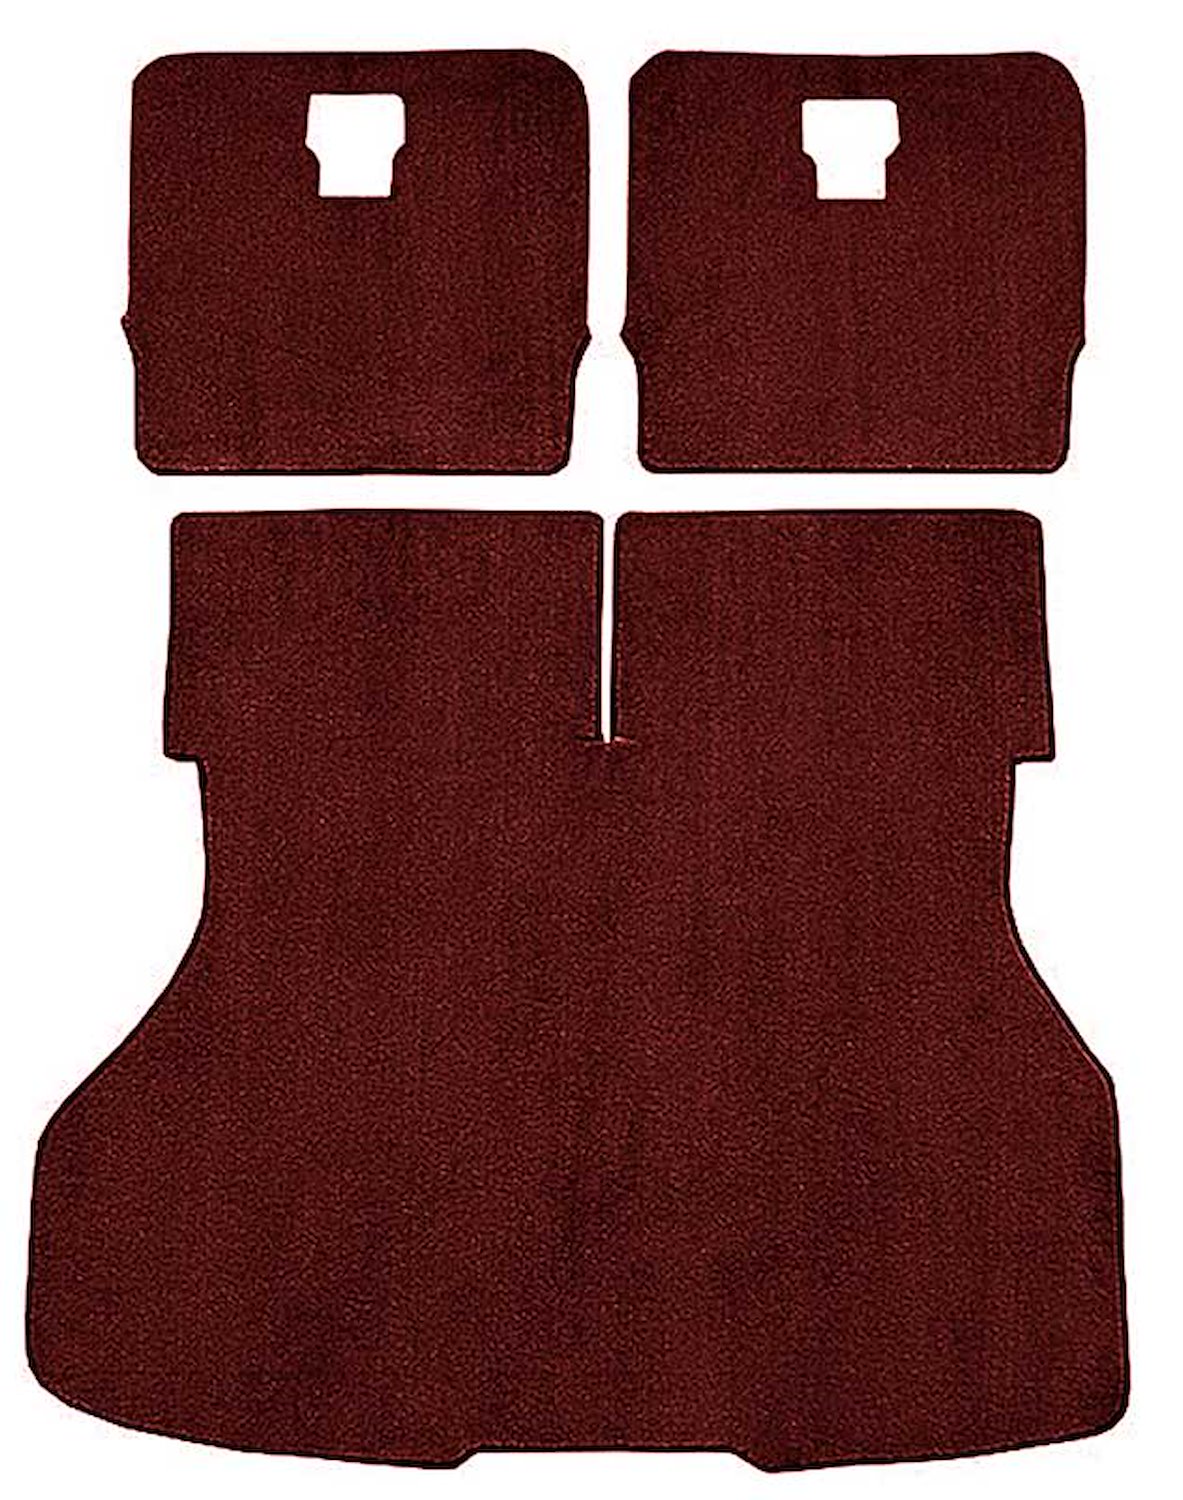 A4026B15 Rear Cargo Area Cut Pile Carpet Set With Mass Backing 1987-93 Mustang Hatchback; Maroon